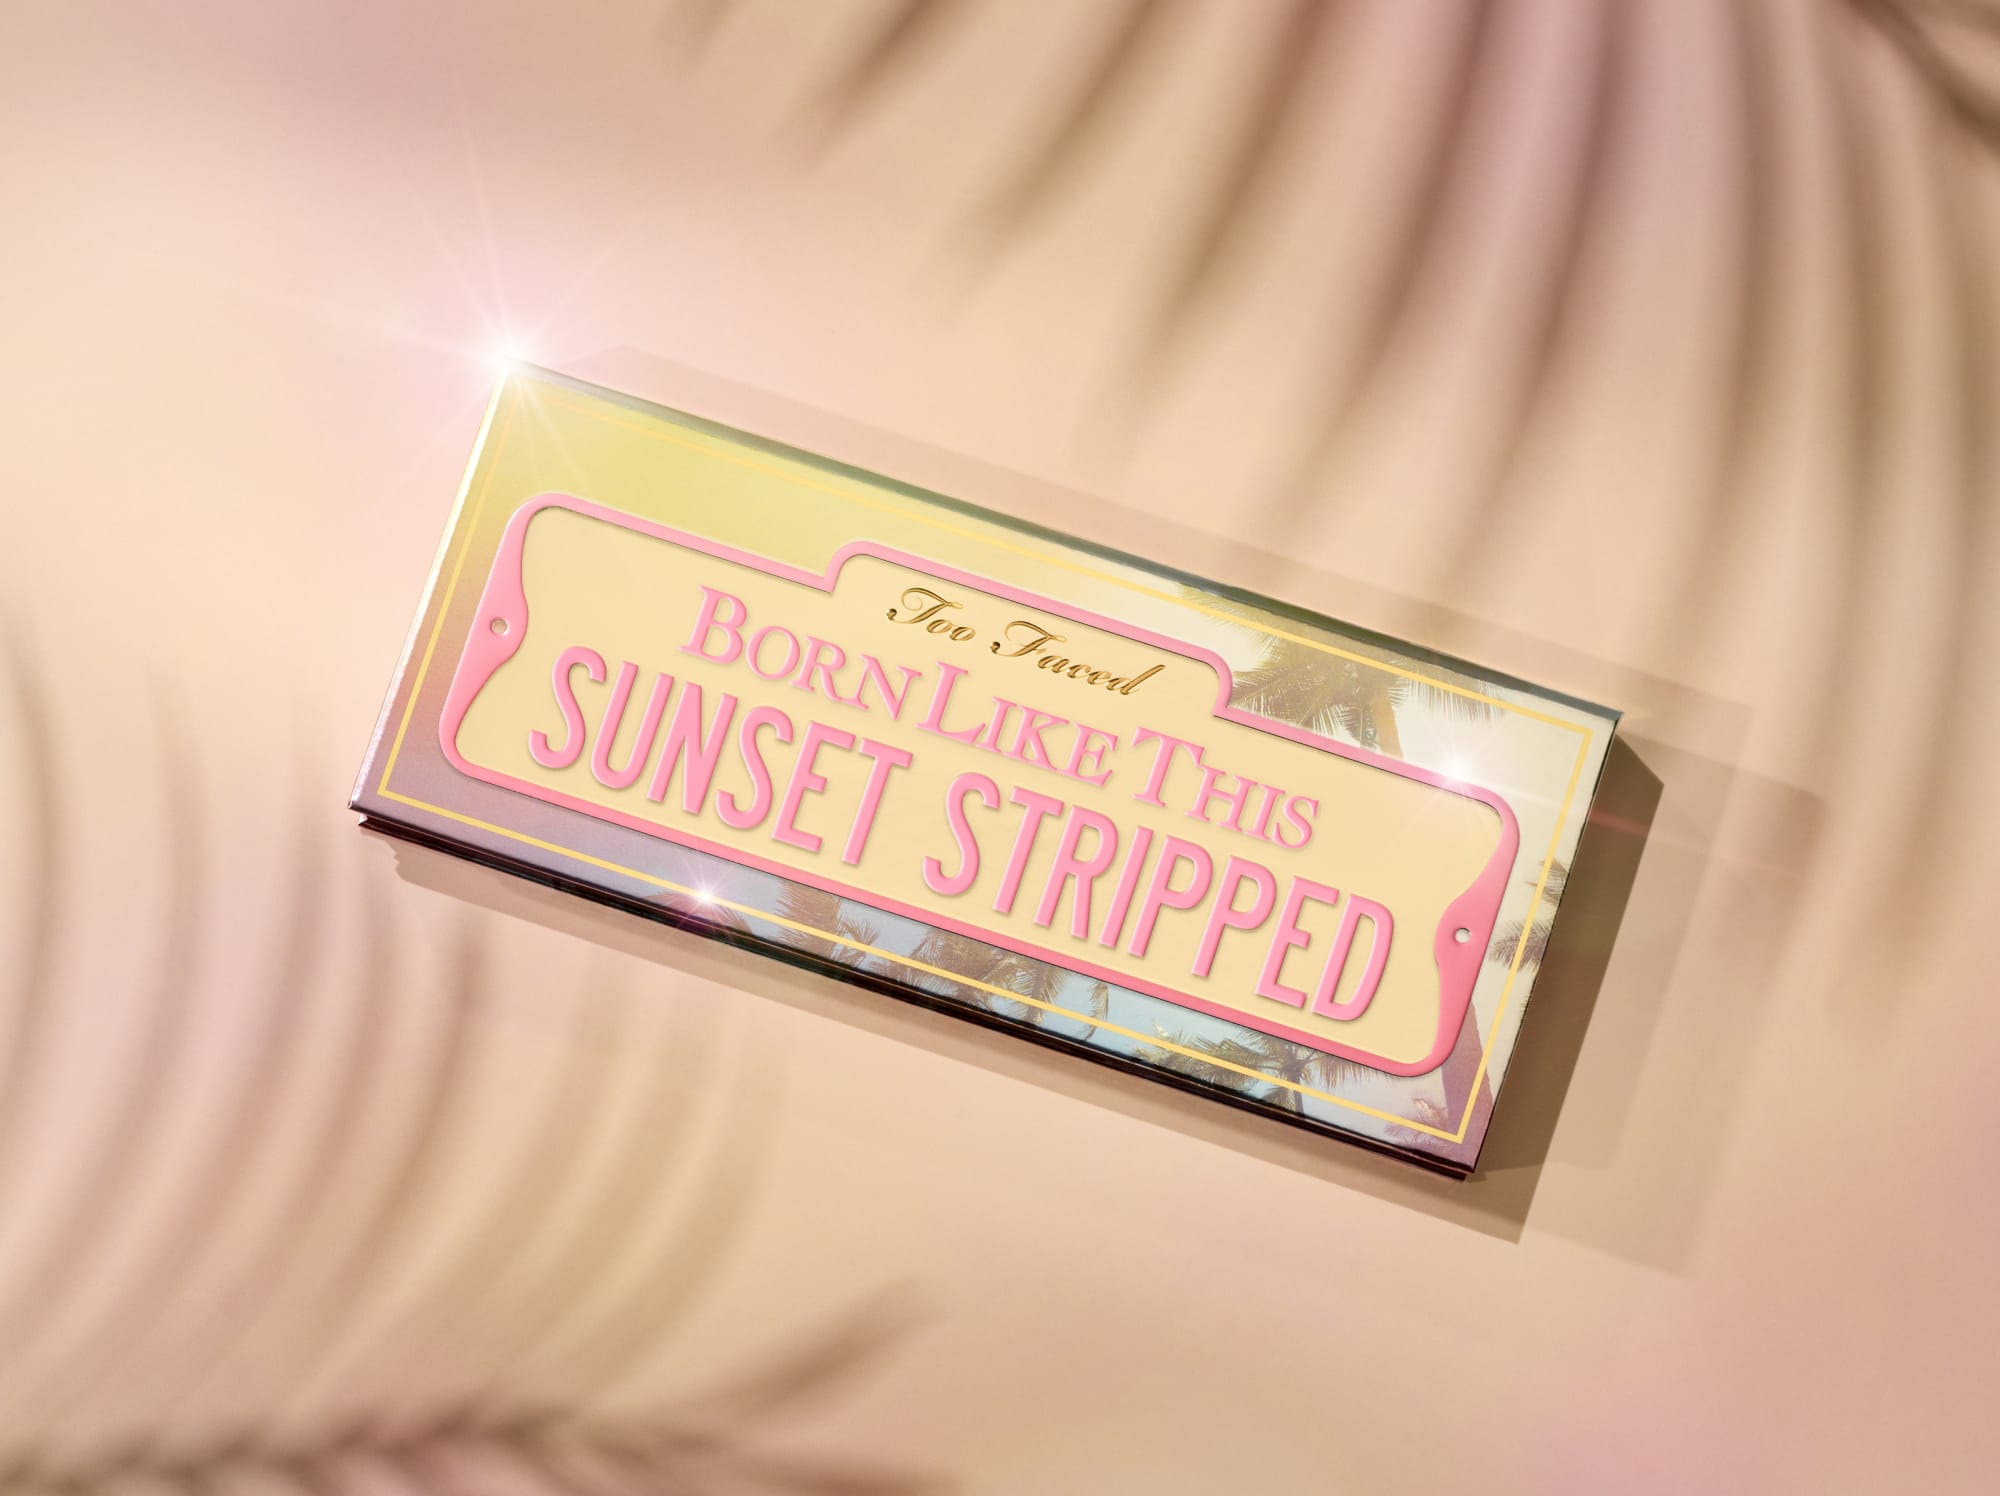 Too Faced launches new beauty products to head into summer with